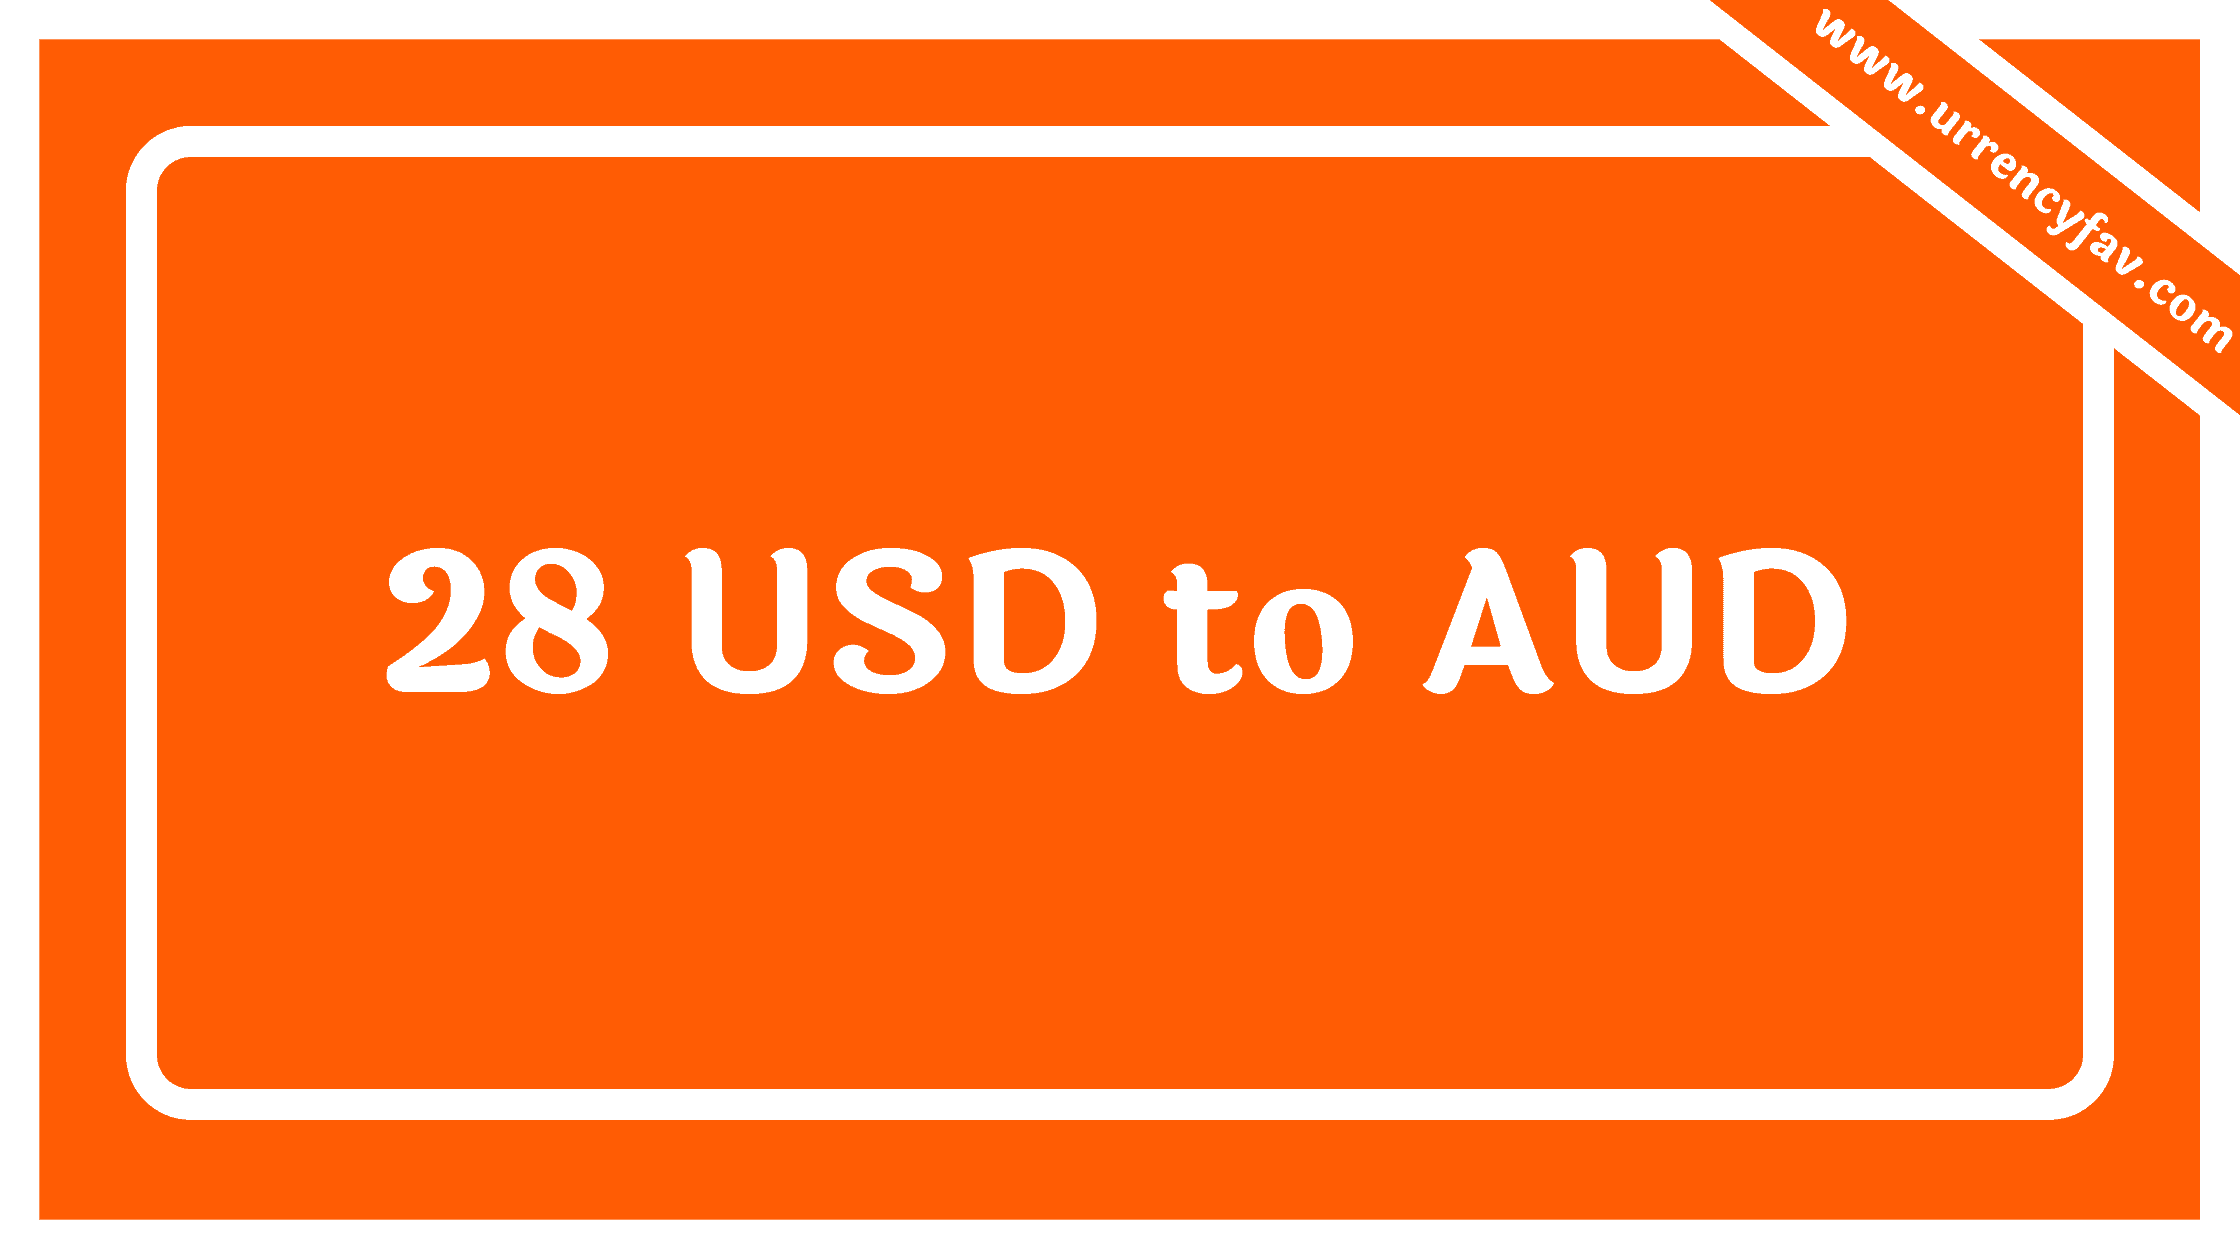 28 USD to AUD